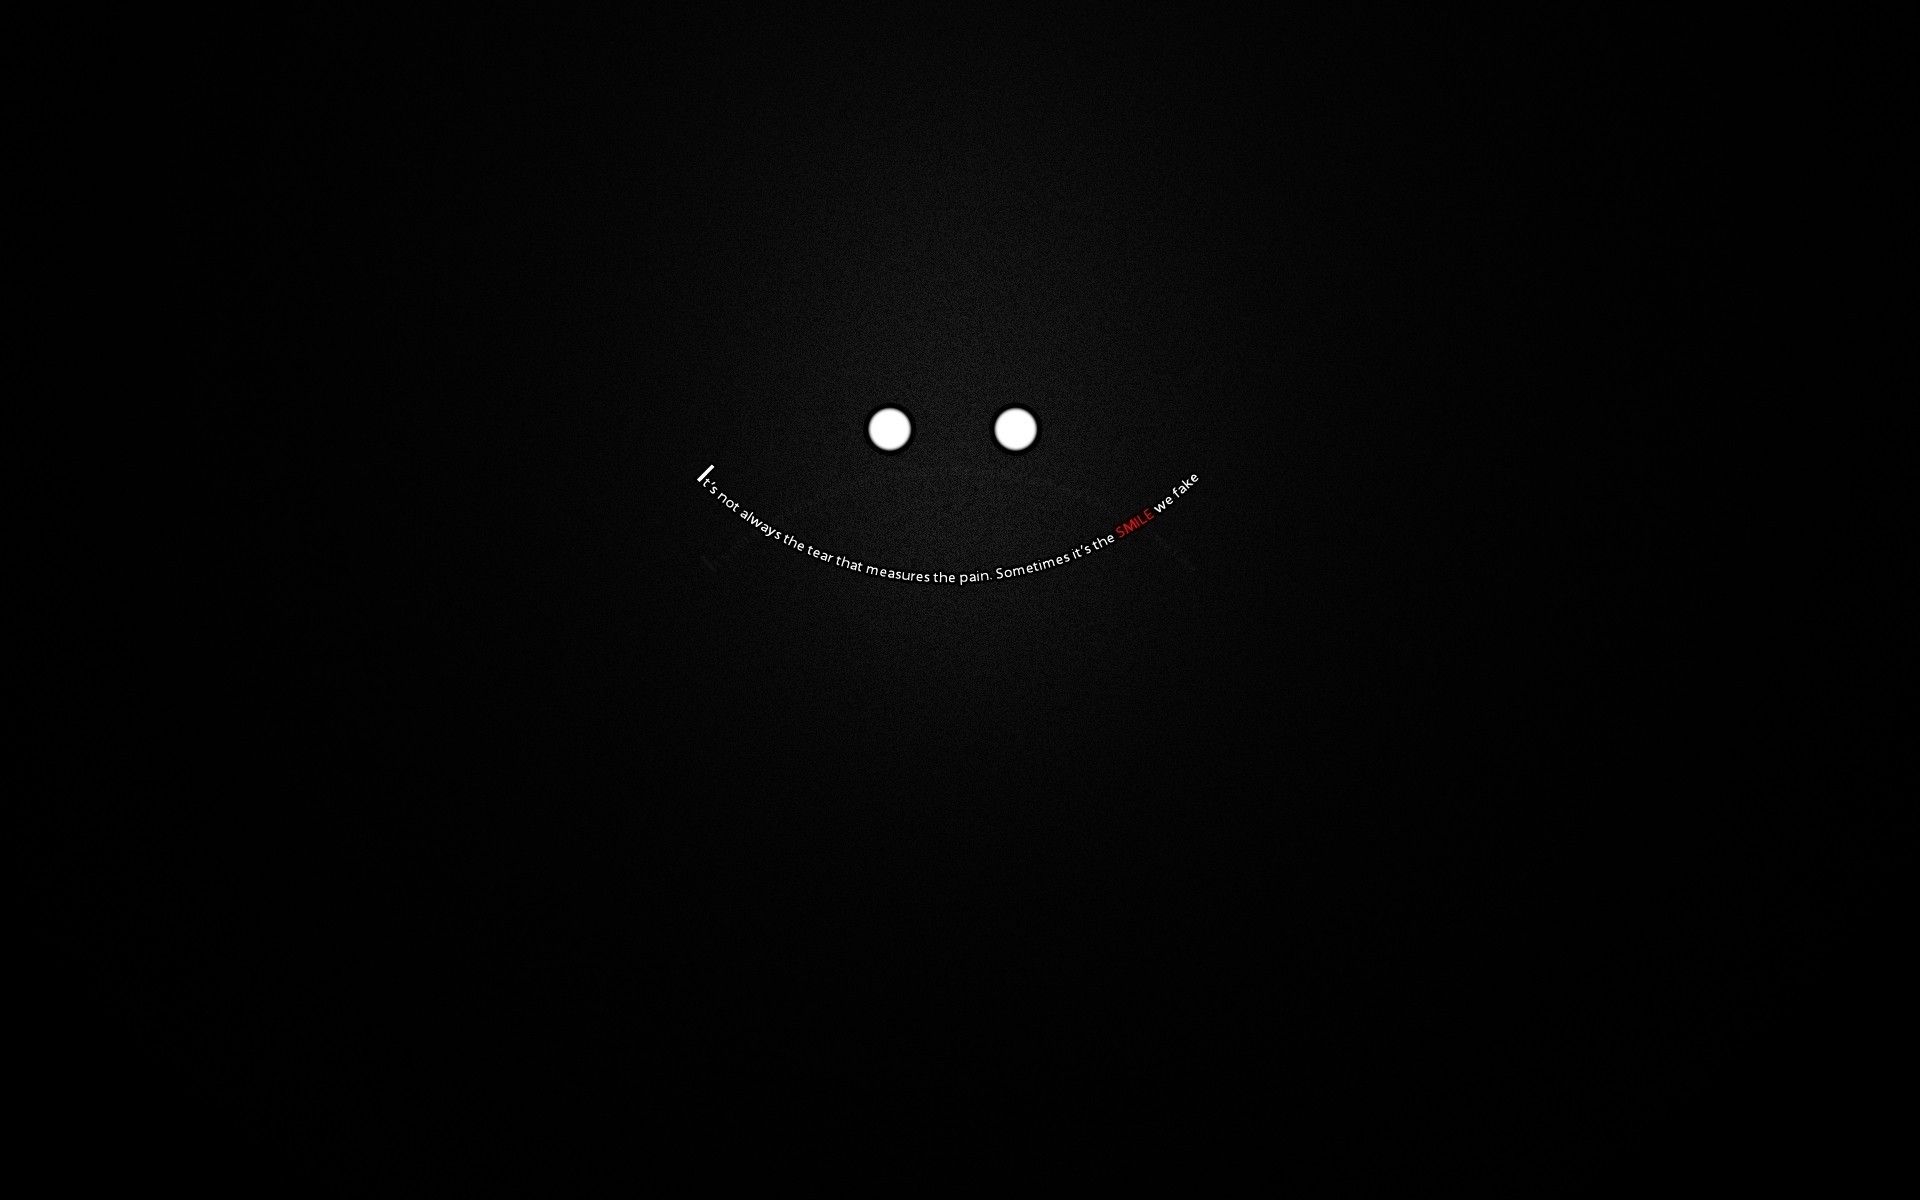 Black background with two dots and a line in the middle - Smile